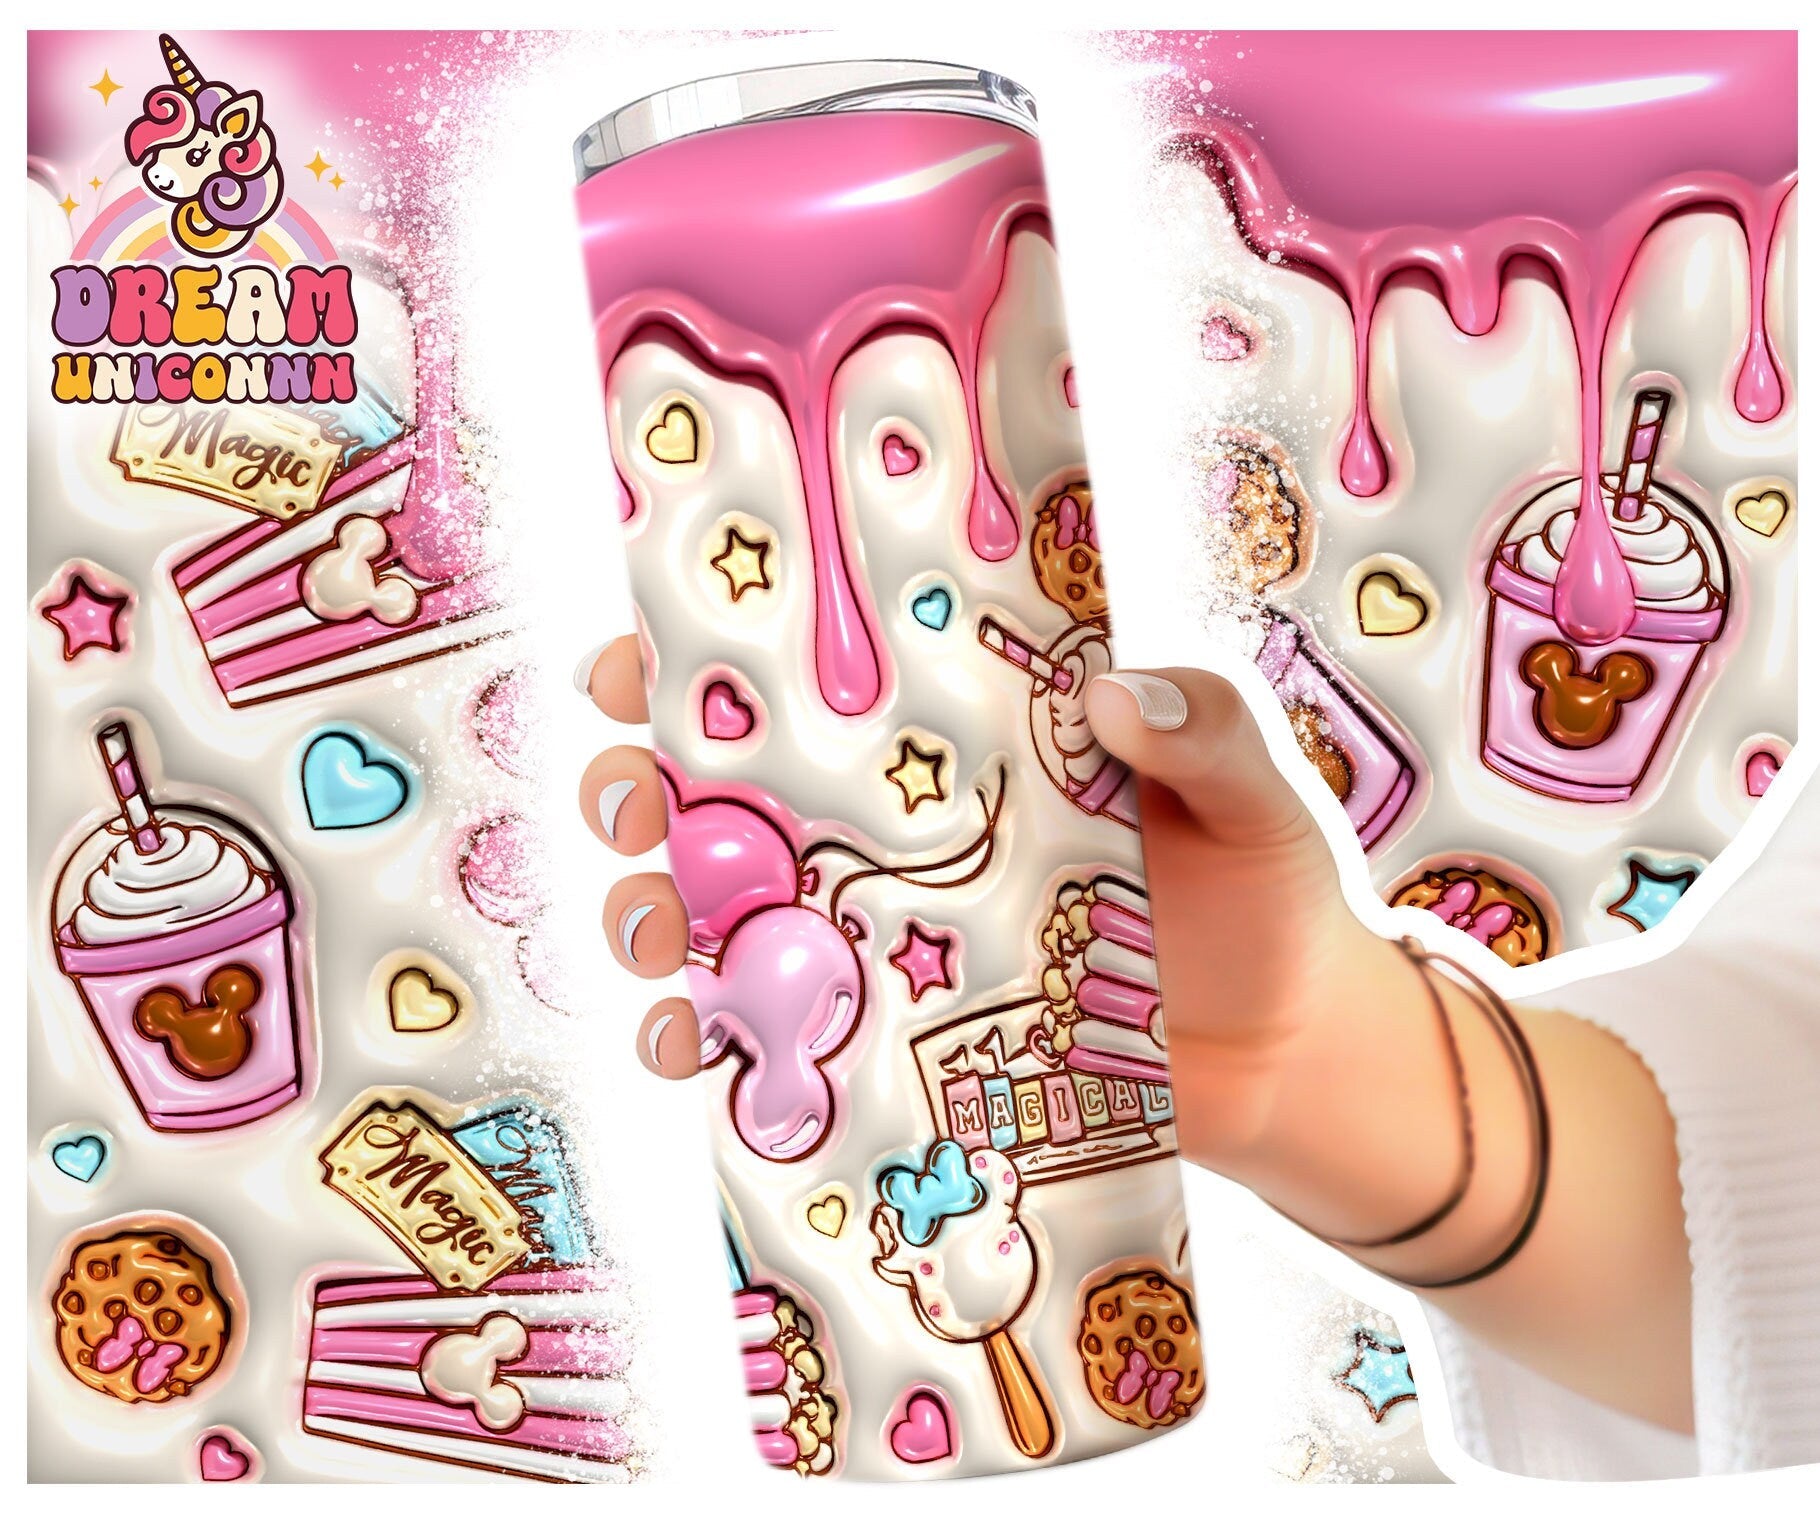 3D Inflated Snack 20 Oz Skinny Tumbler, Park Snacks Png, Snackgoal Sublimation, Magical Snack, Drinks And Foods Wrap - VartDigitals